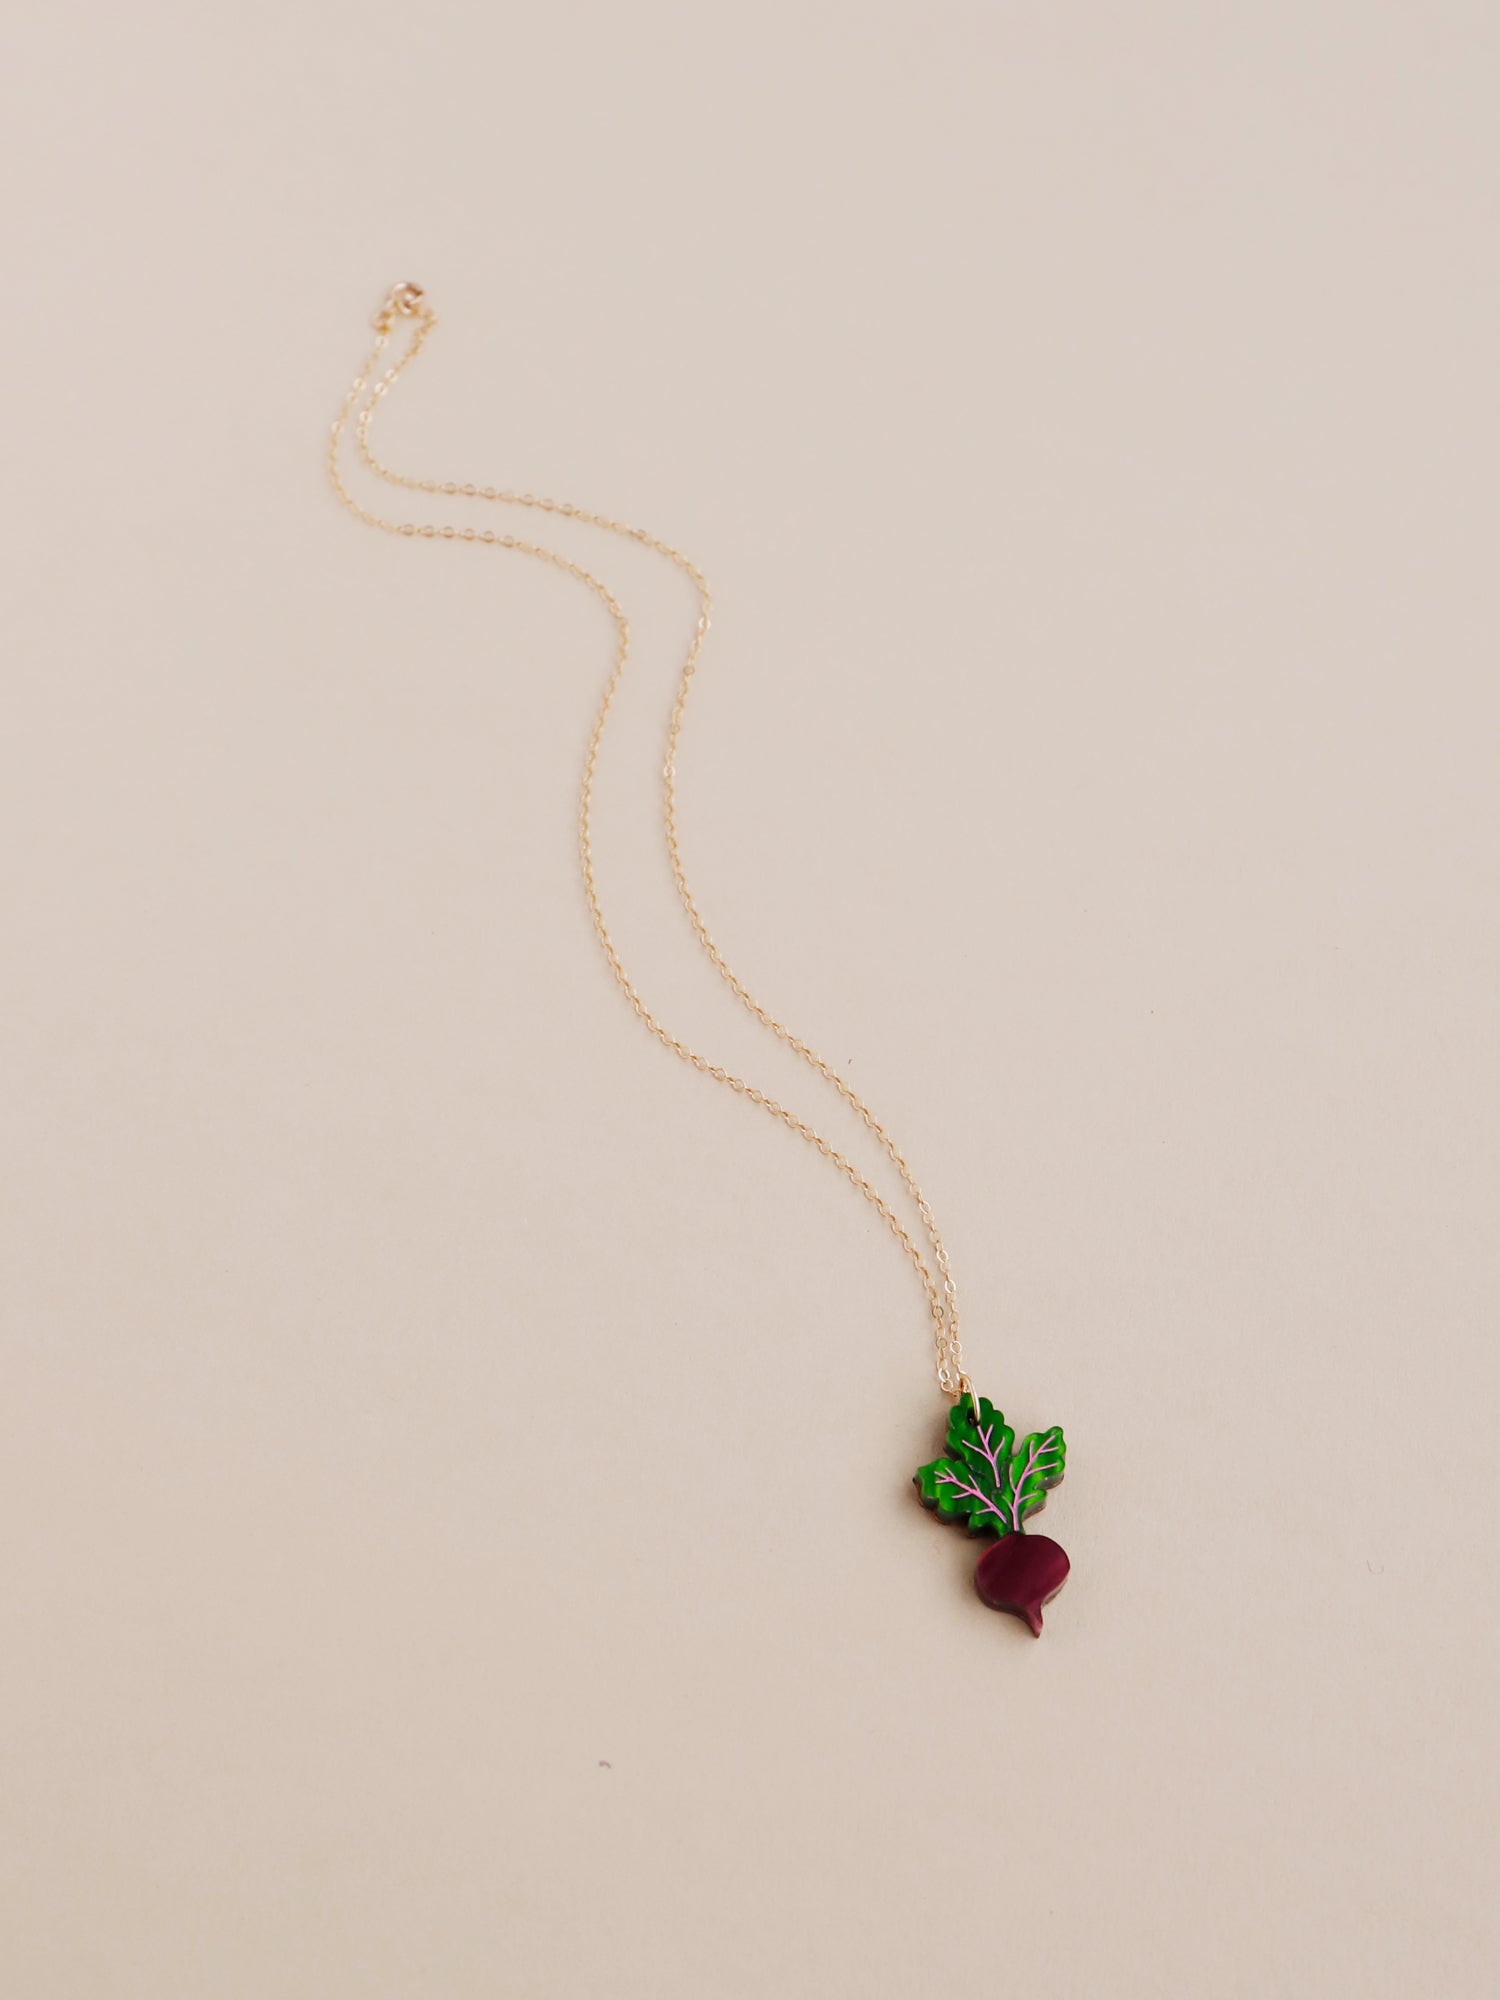 Purple and green acrylic mini beetroot pendant necklace with optional gold-filled chain. Handmade in London by Wolf & Moon.